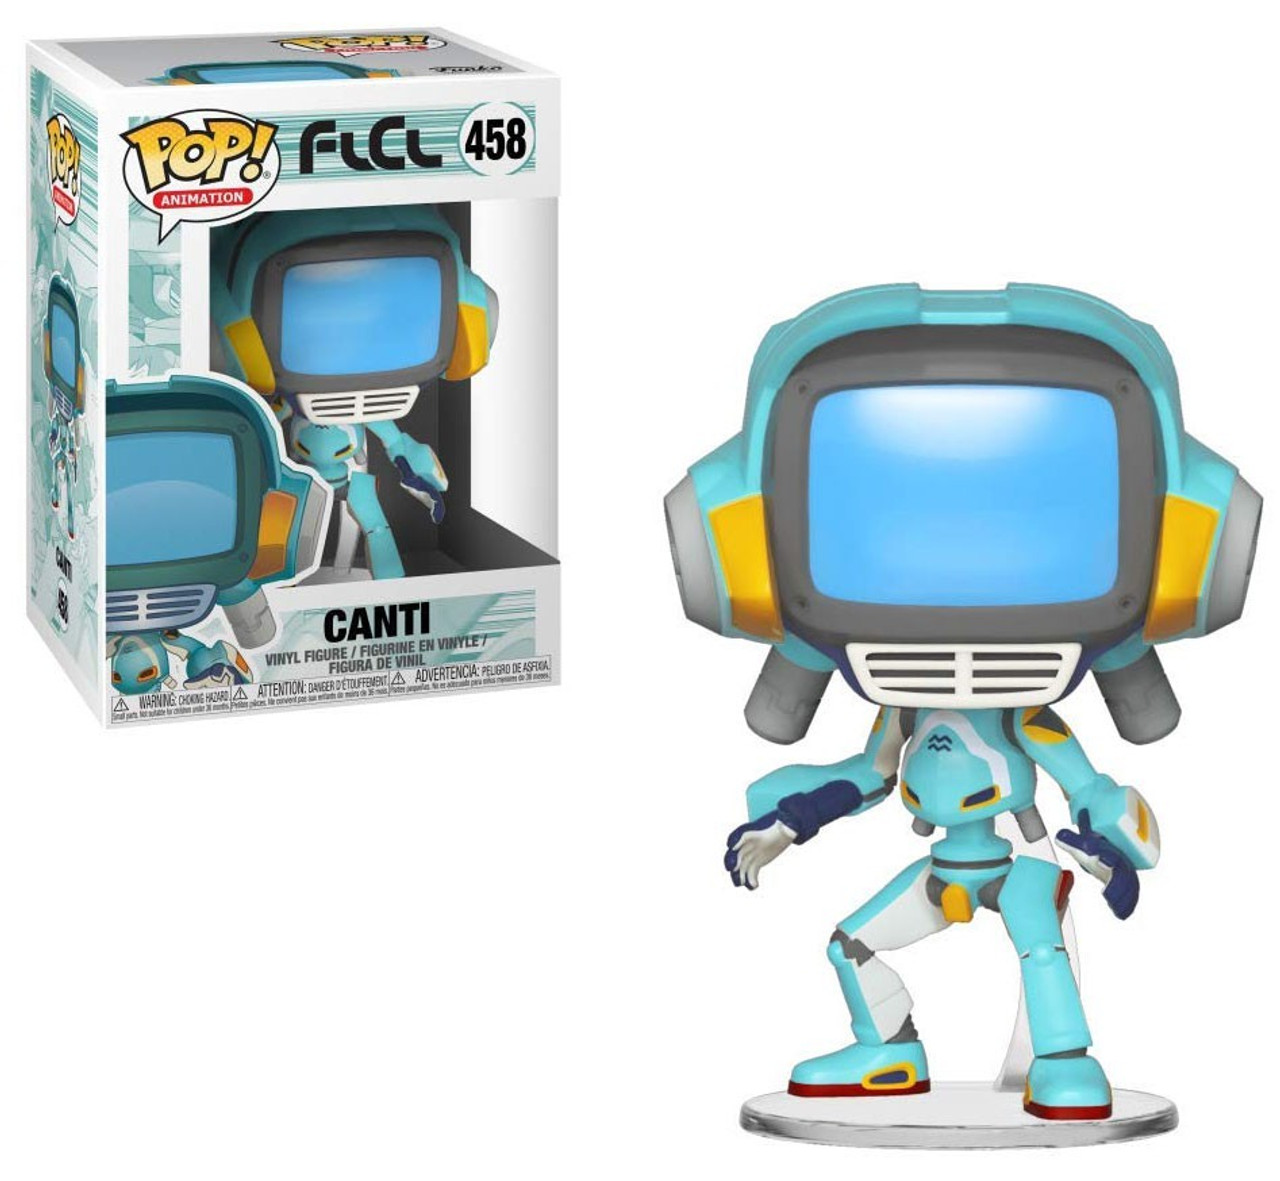 Funko Flcl Pop Animation Canti Vinyl Figure 458 Toywiz - robot animation pack roblox review